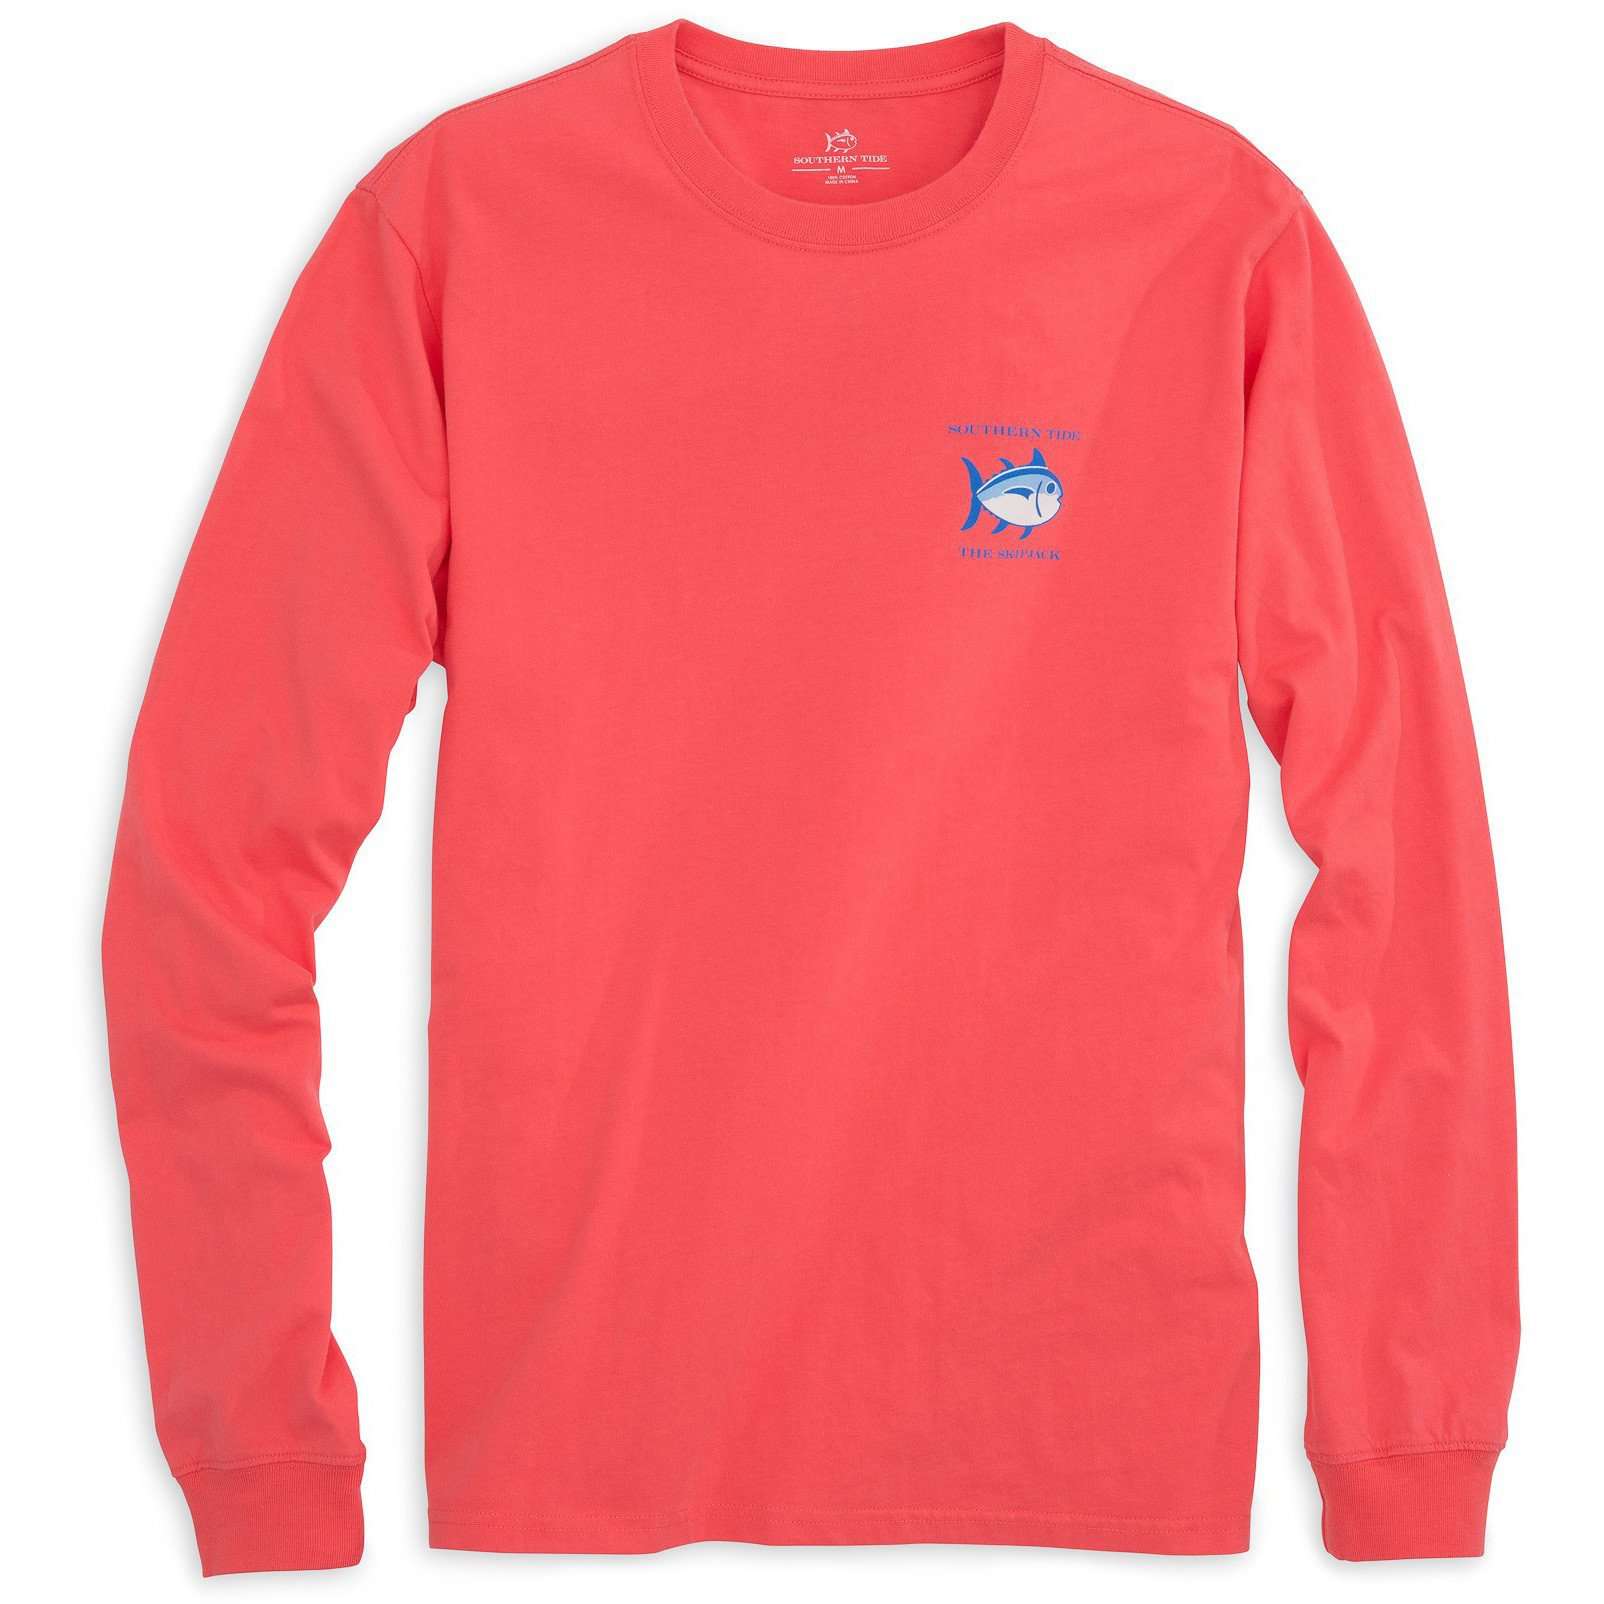 Long Sleeve Original Skipjack Tee Shirt in Sunset by Southern Tide - Country Club Prep